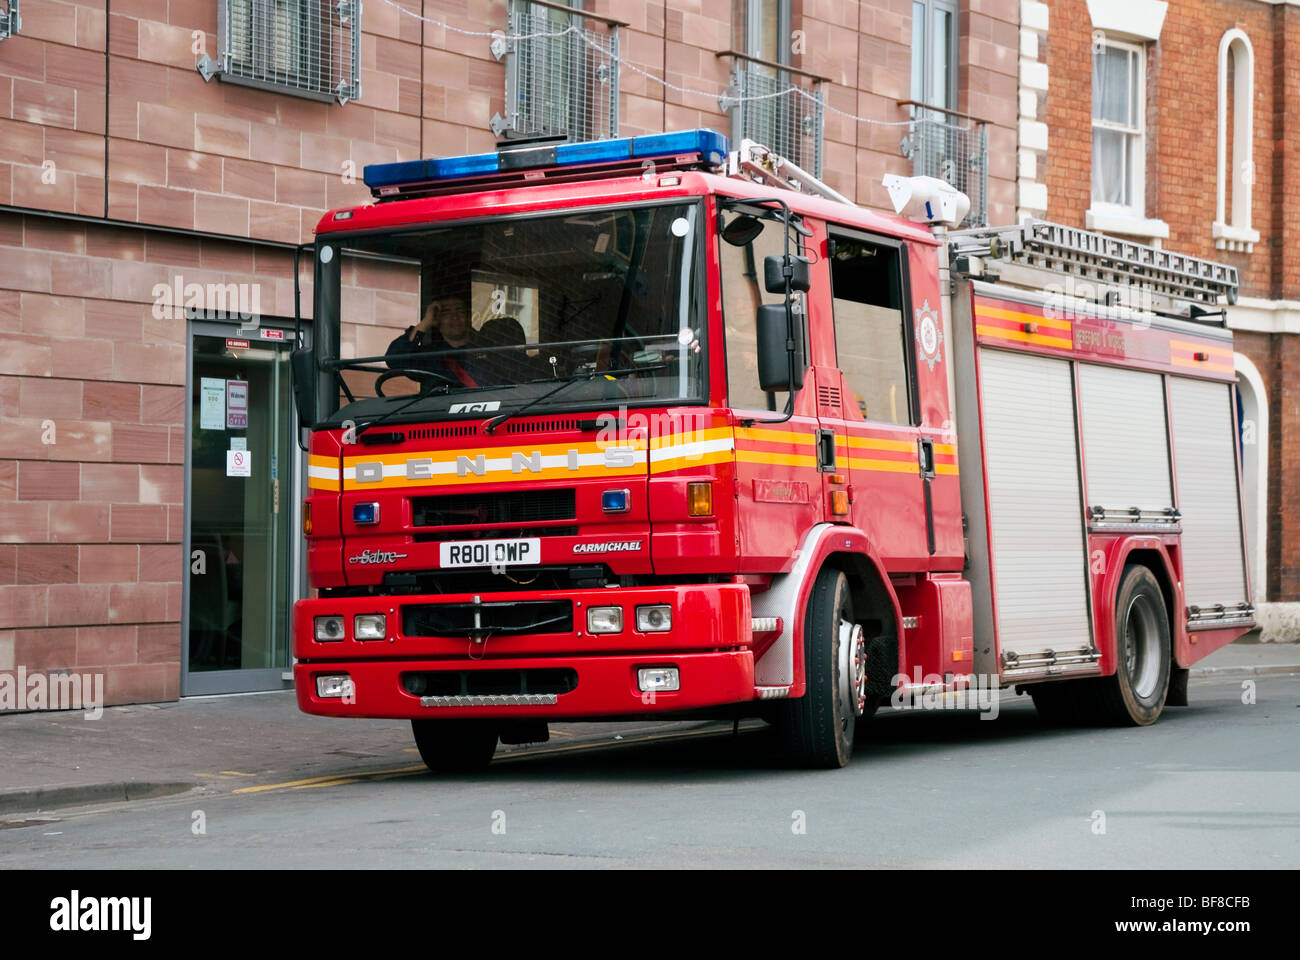 Fire Engine, UK. Dennis red fire-engine parked in a town street on a routine call. Stock Photo